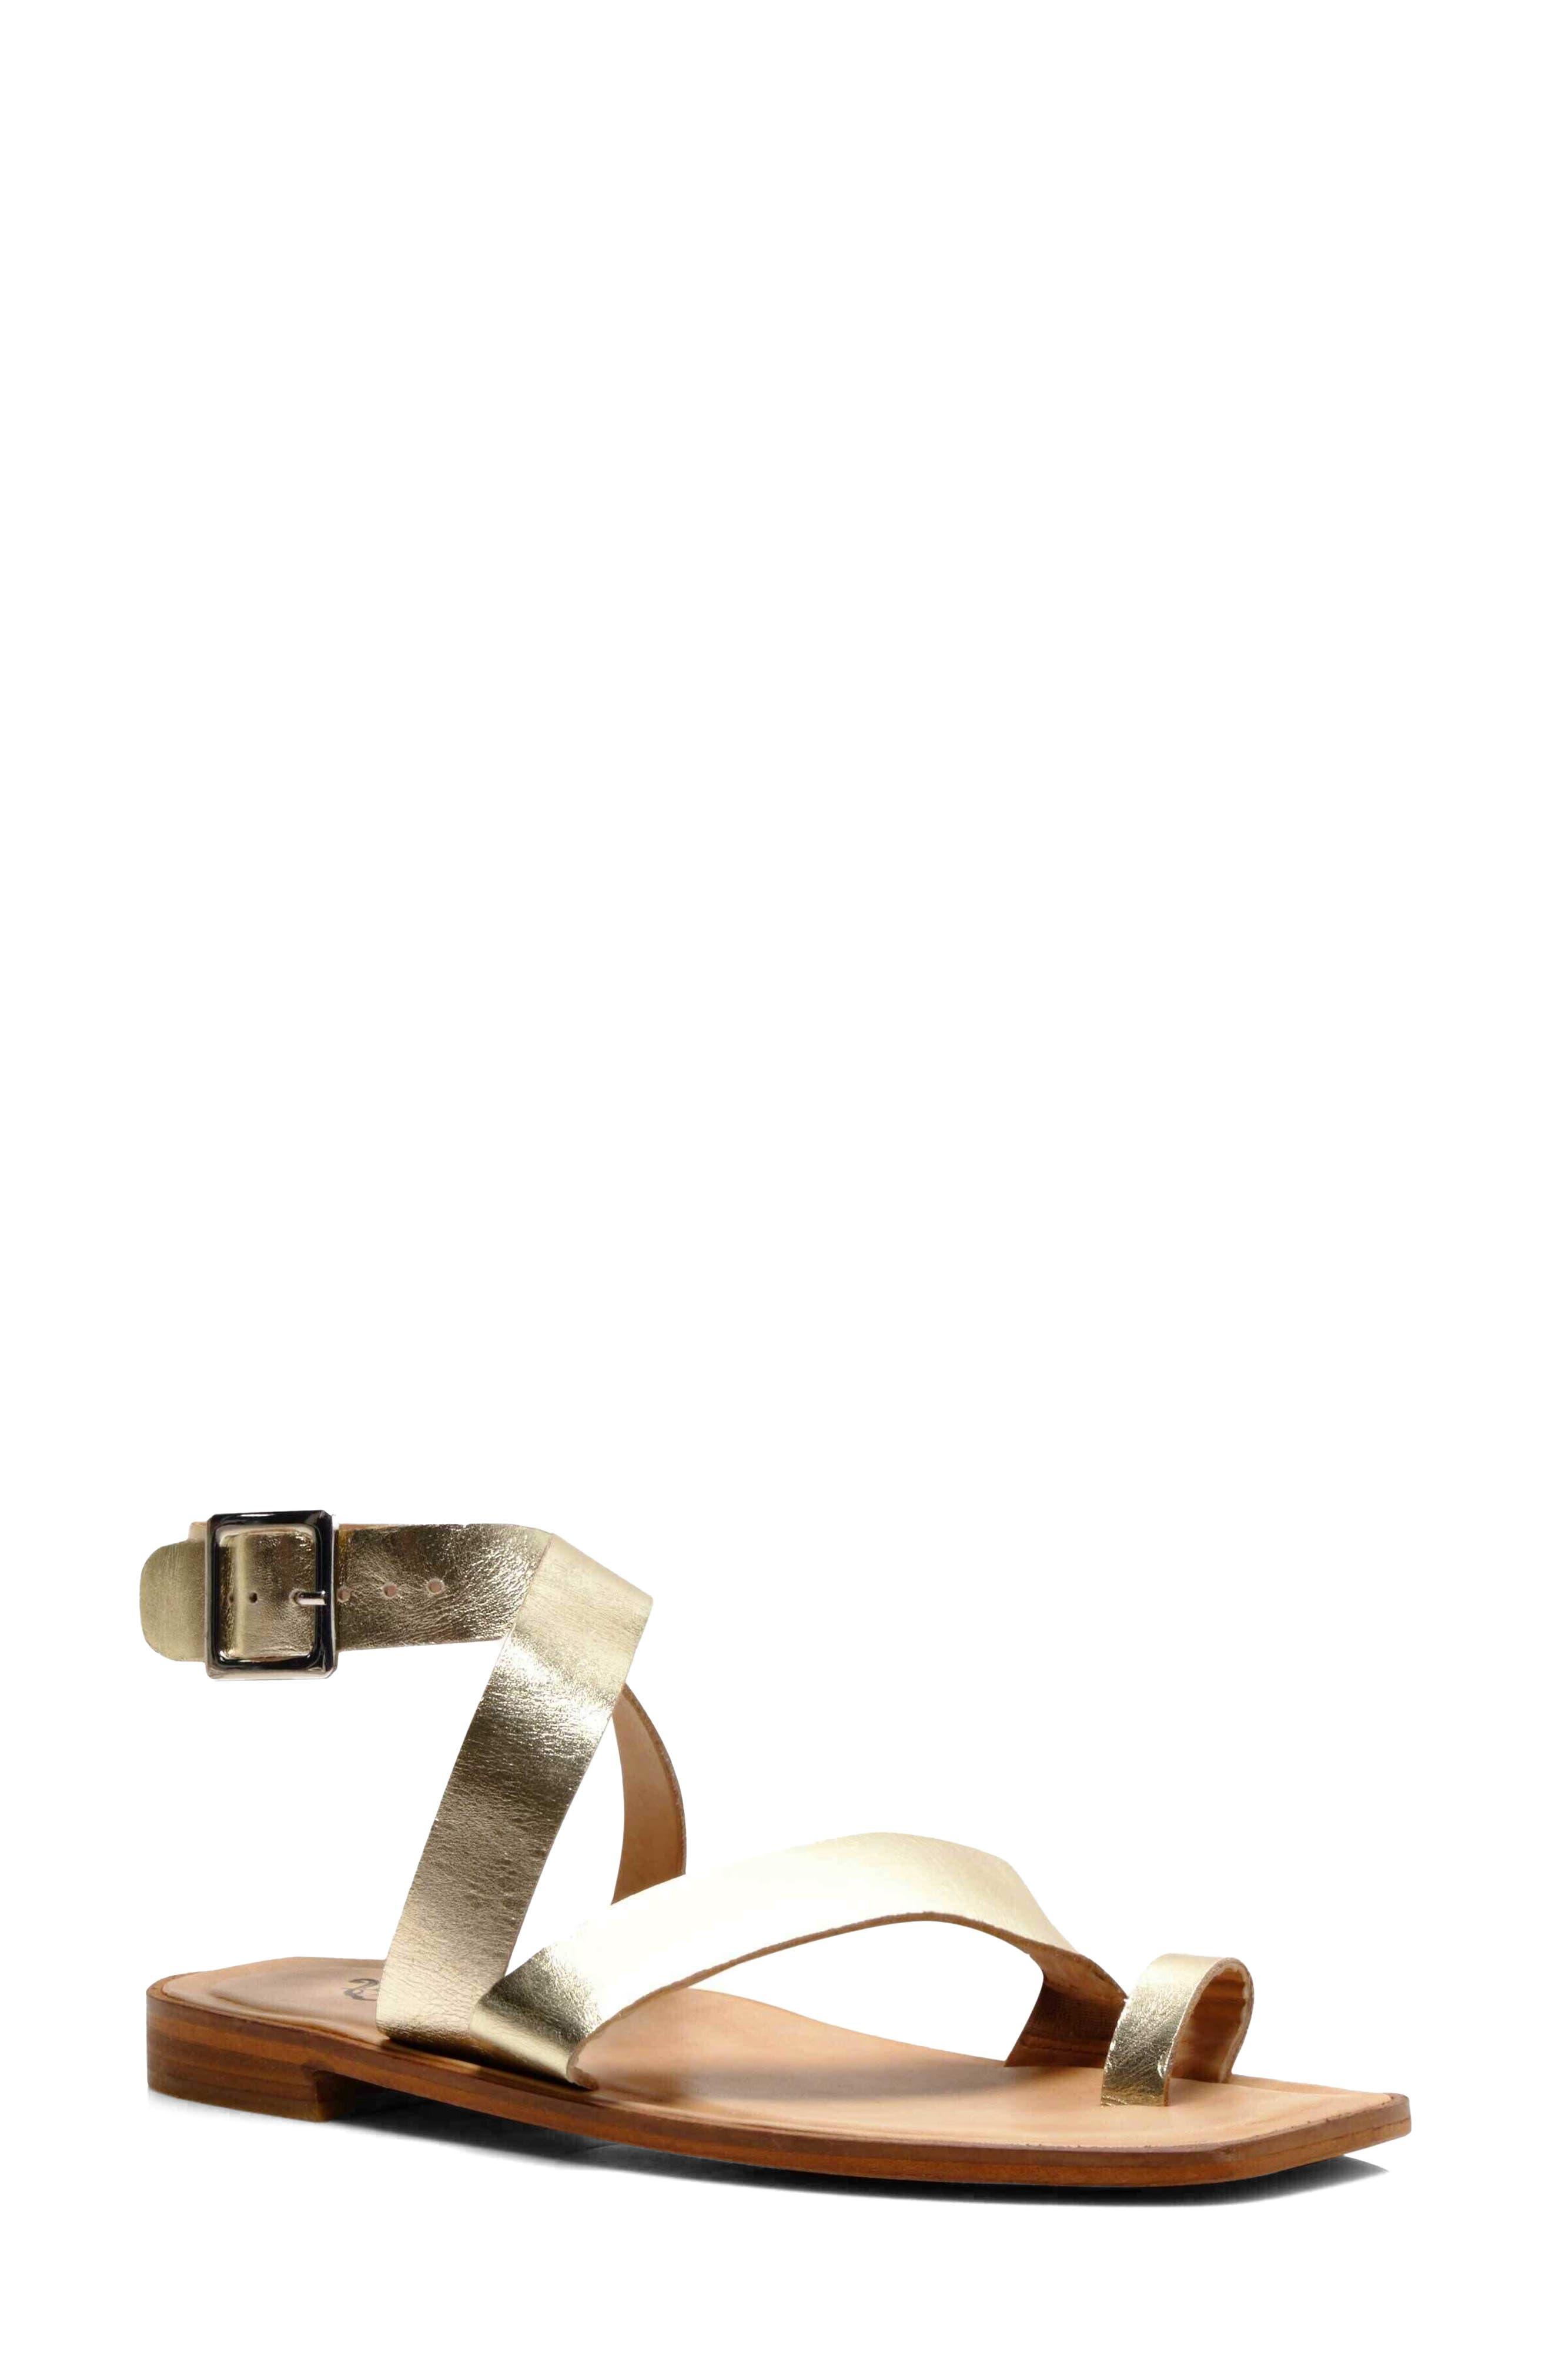 Free People Romeo Wrap Sandal in Natural | Lyst